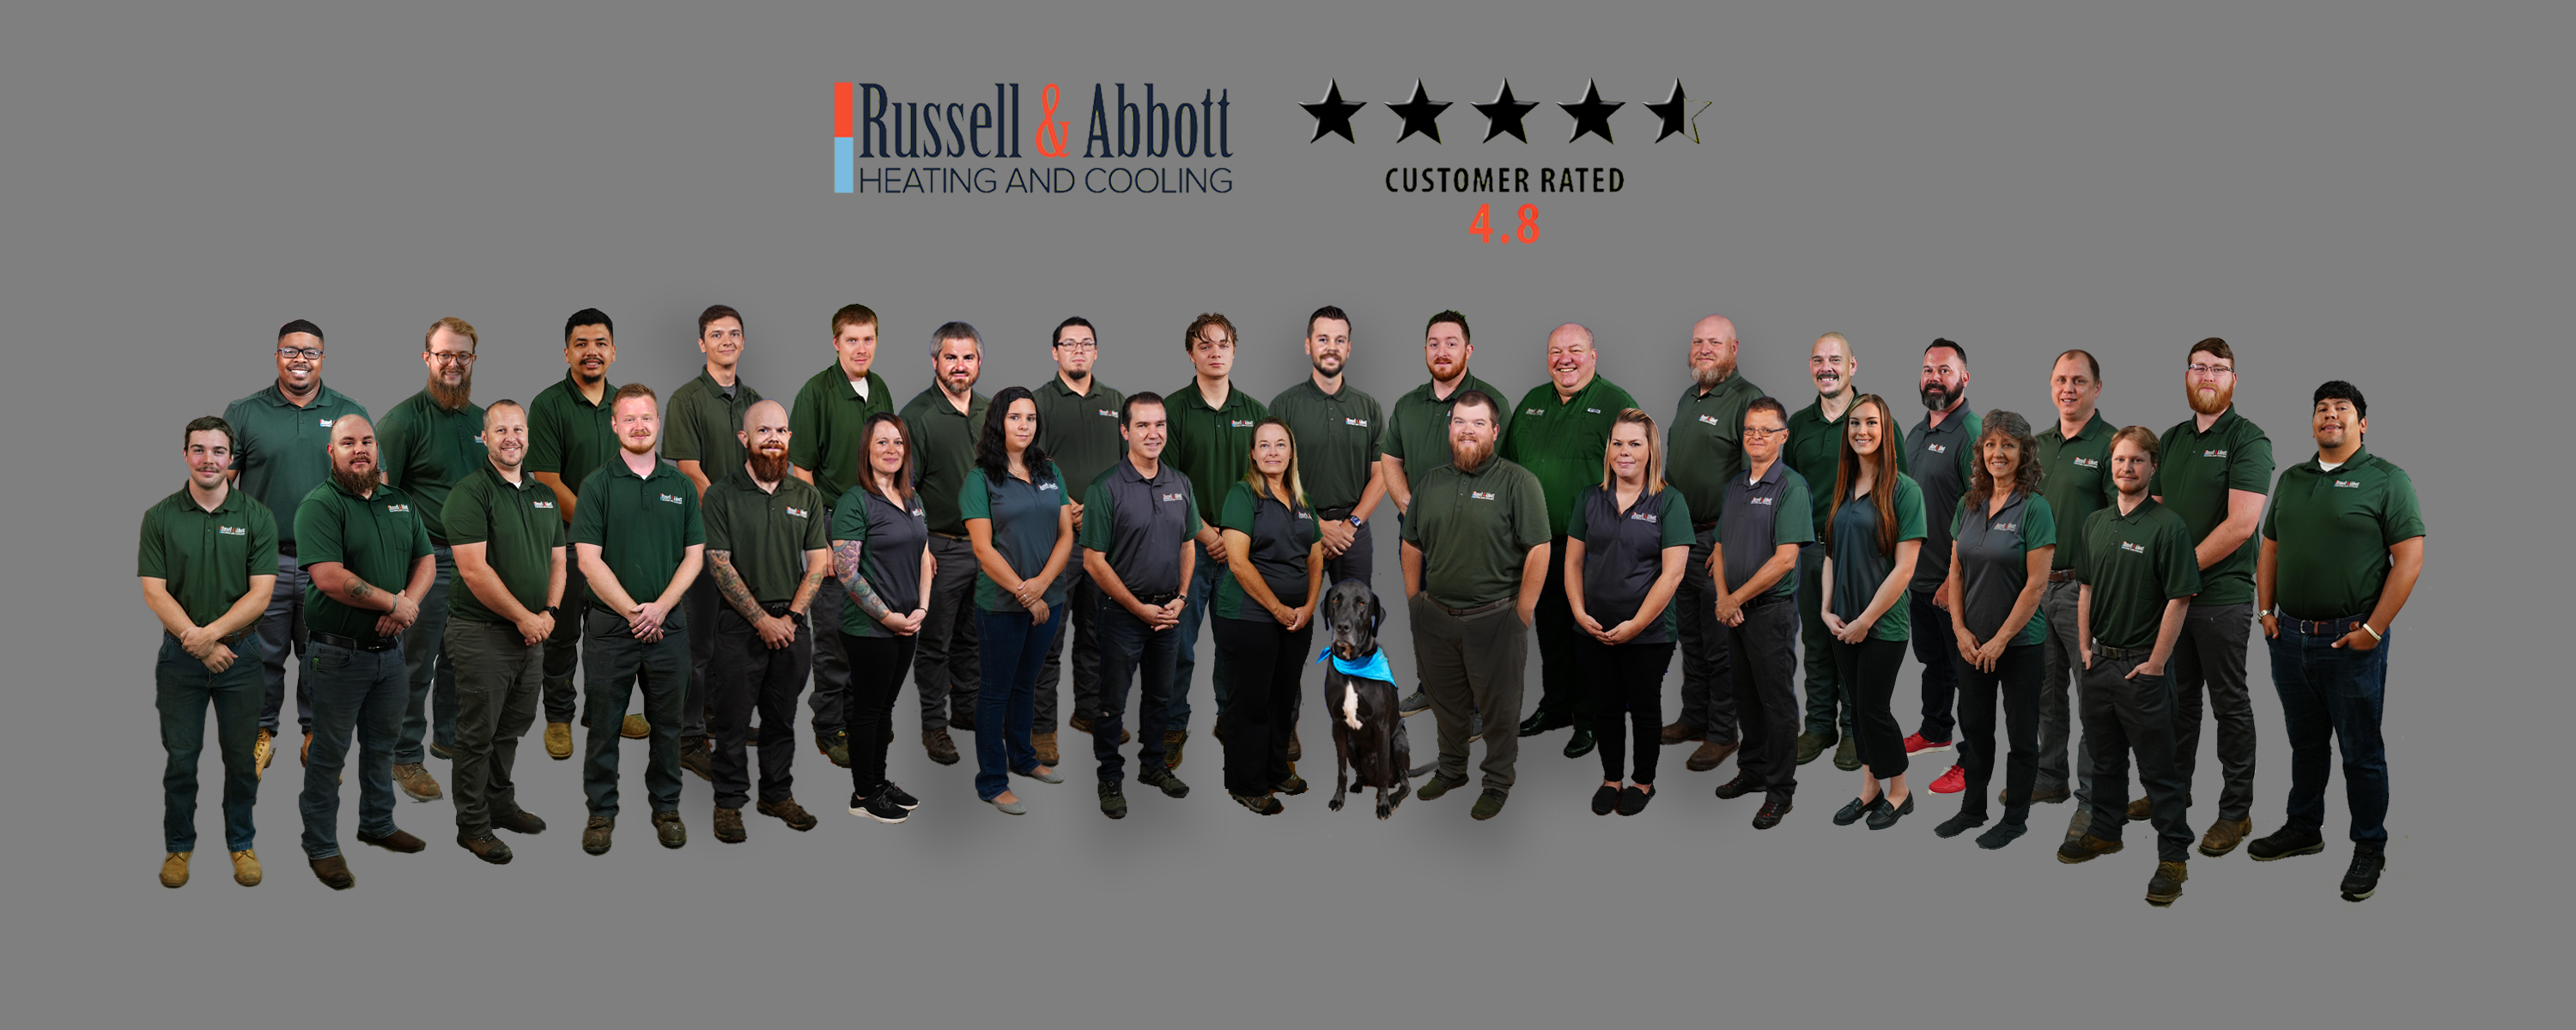 Russell & Abbott Heating and Cooling team